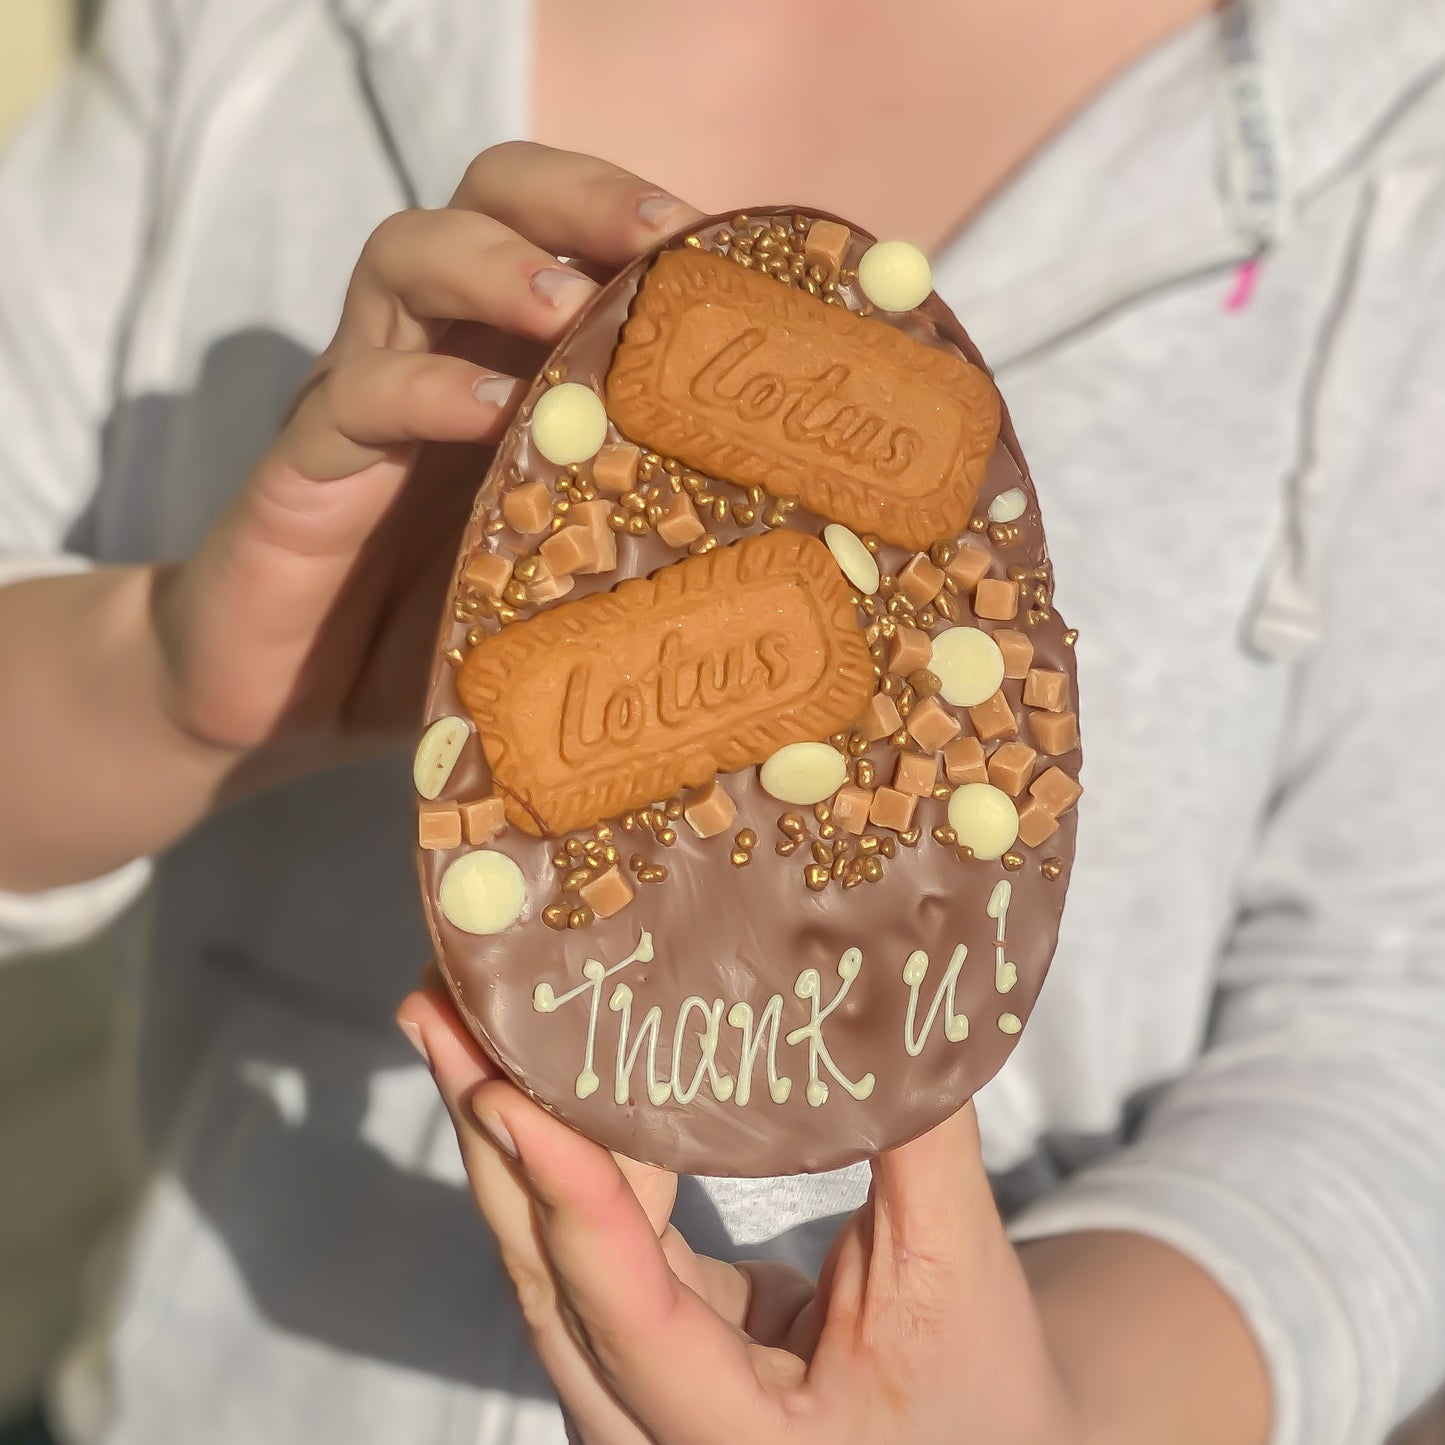 Personalised Biscoff Loaded Egg